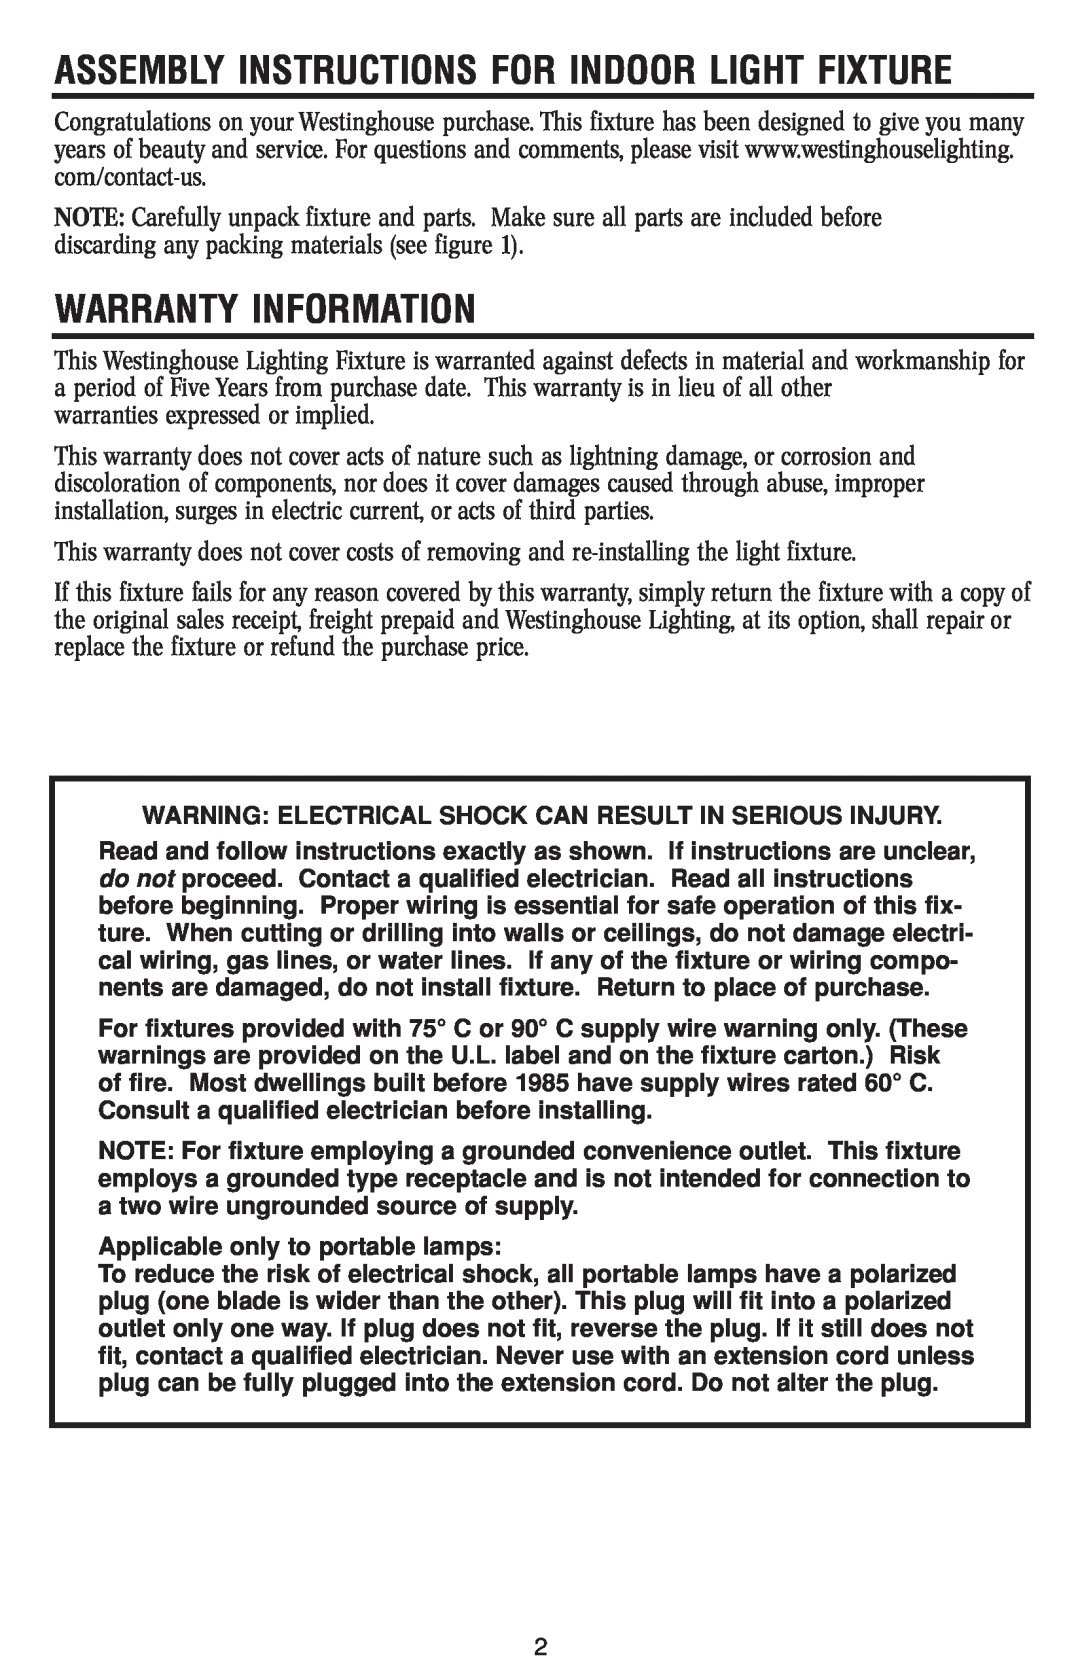 Westinghouse W-367 owner manual Warranty Information, Assembly Instructions For Indoor Light Fixture 